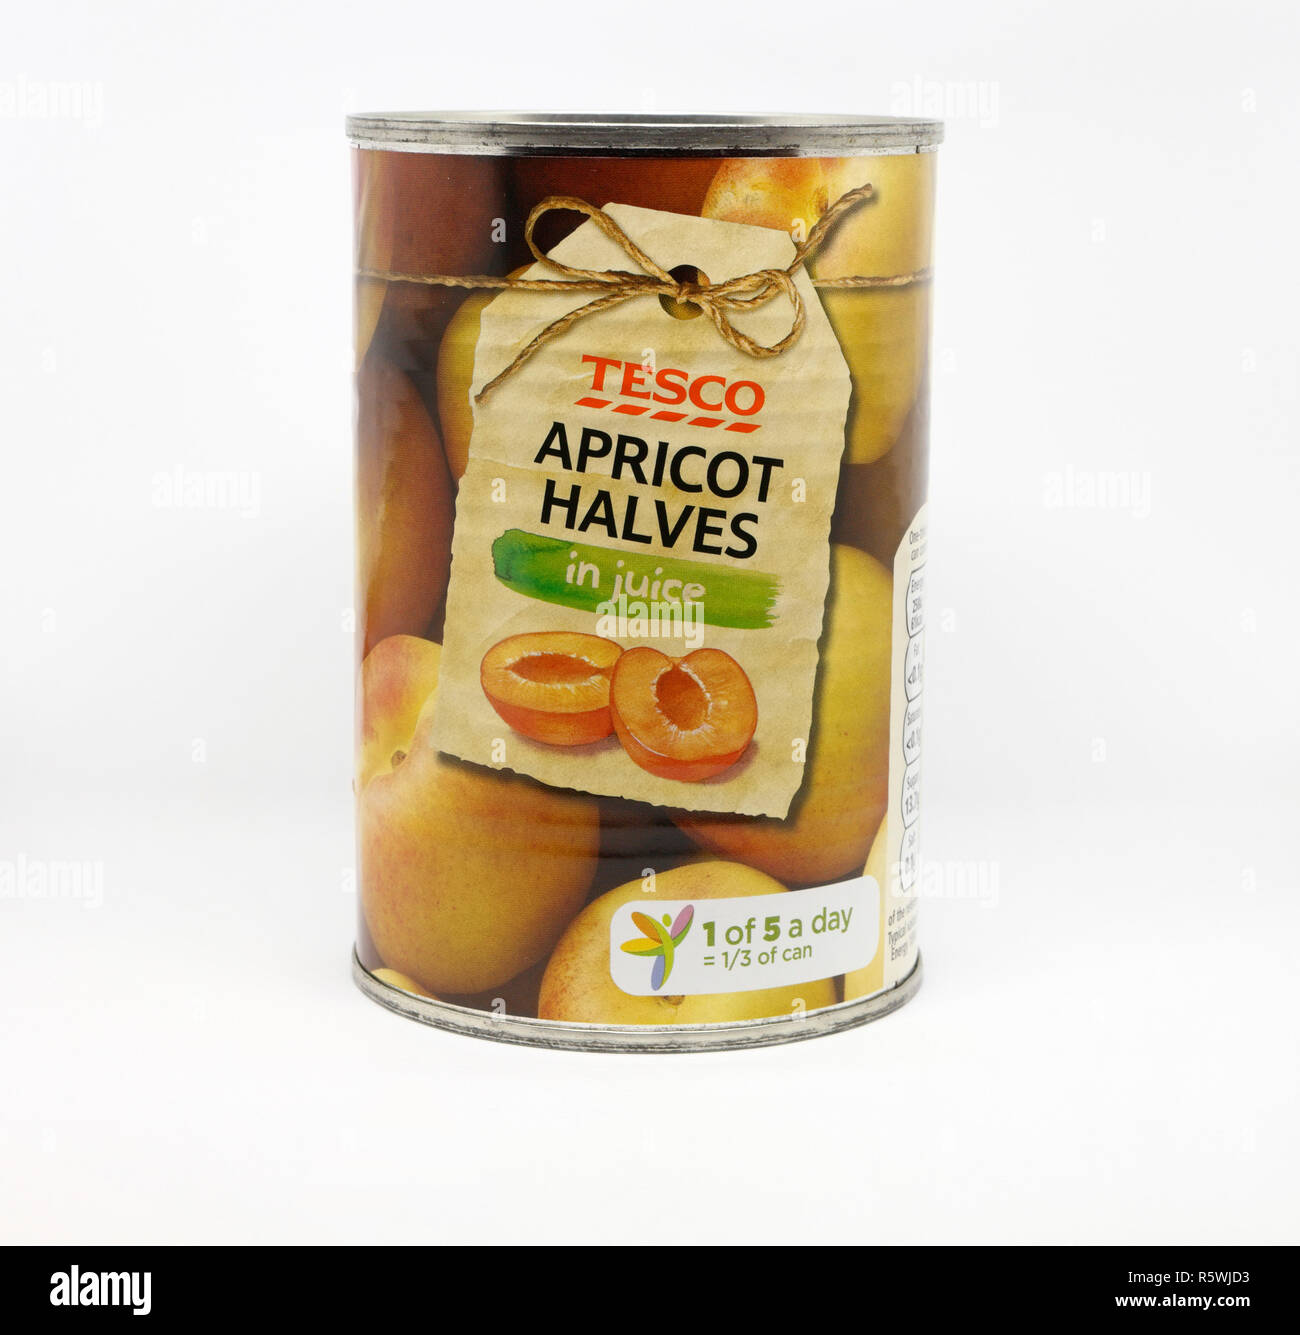 Tin can of Tesco Apricot Halves, tinned food product label Stock Photo